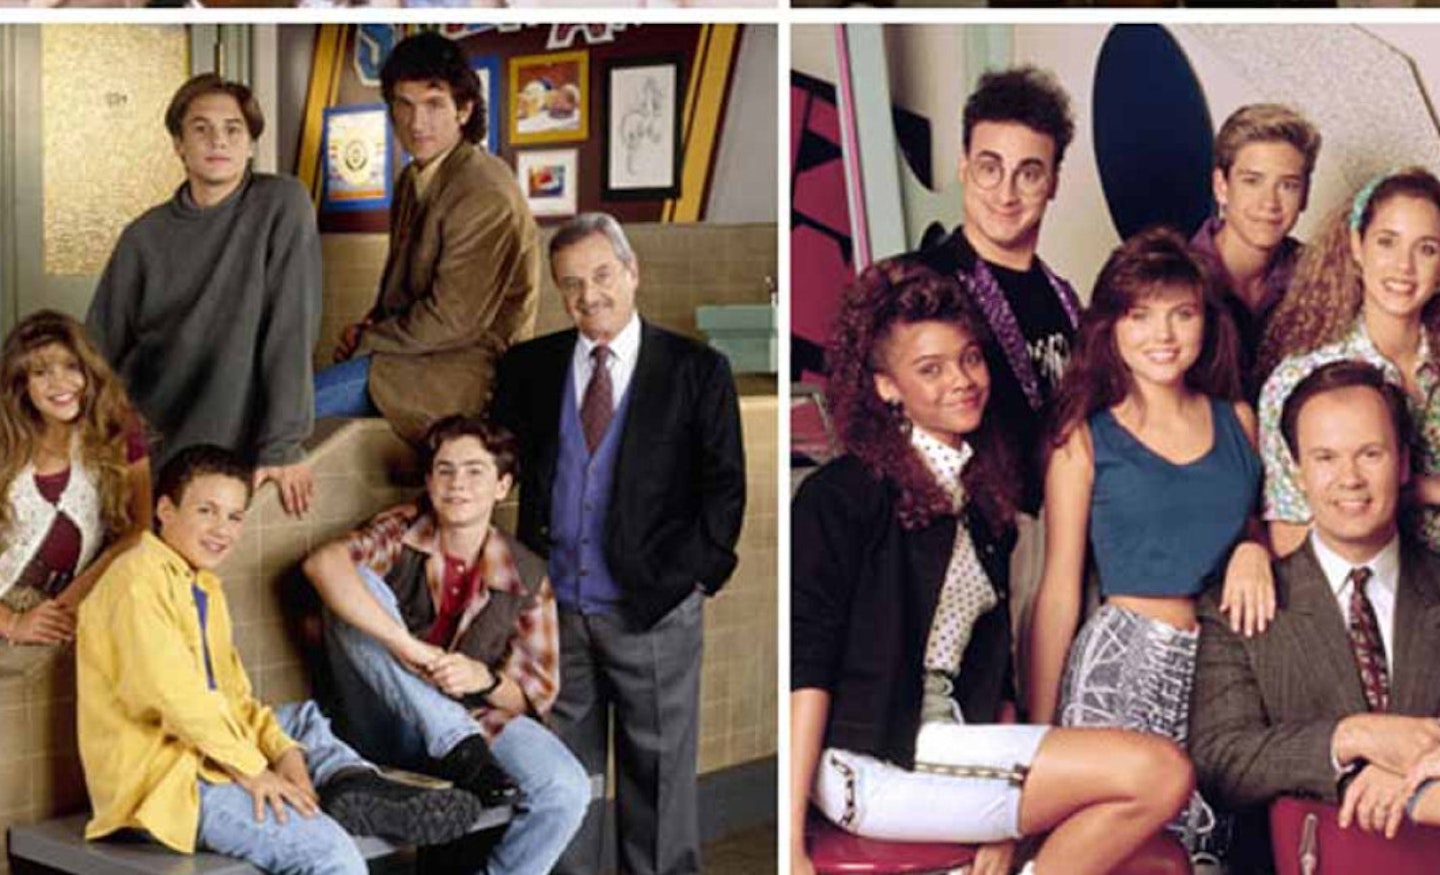 GALLERY >> Which 90s TV casts have reunited?